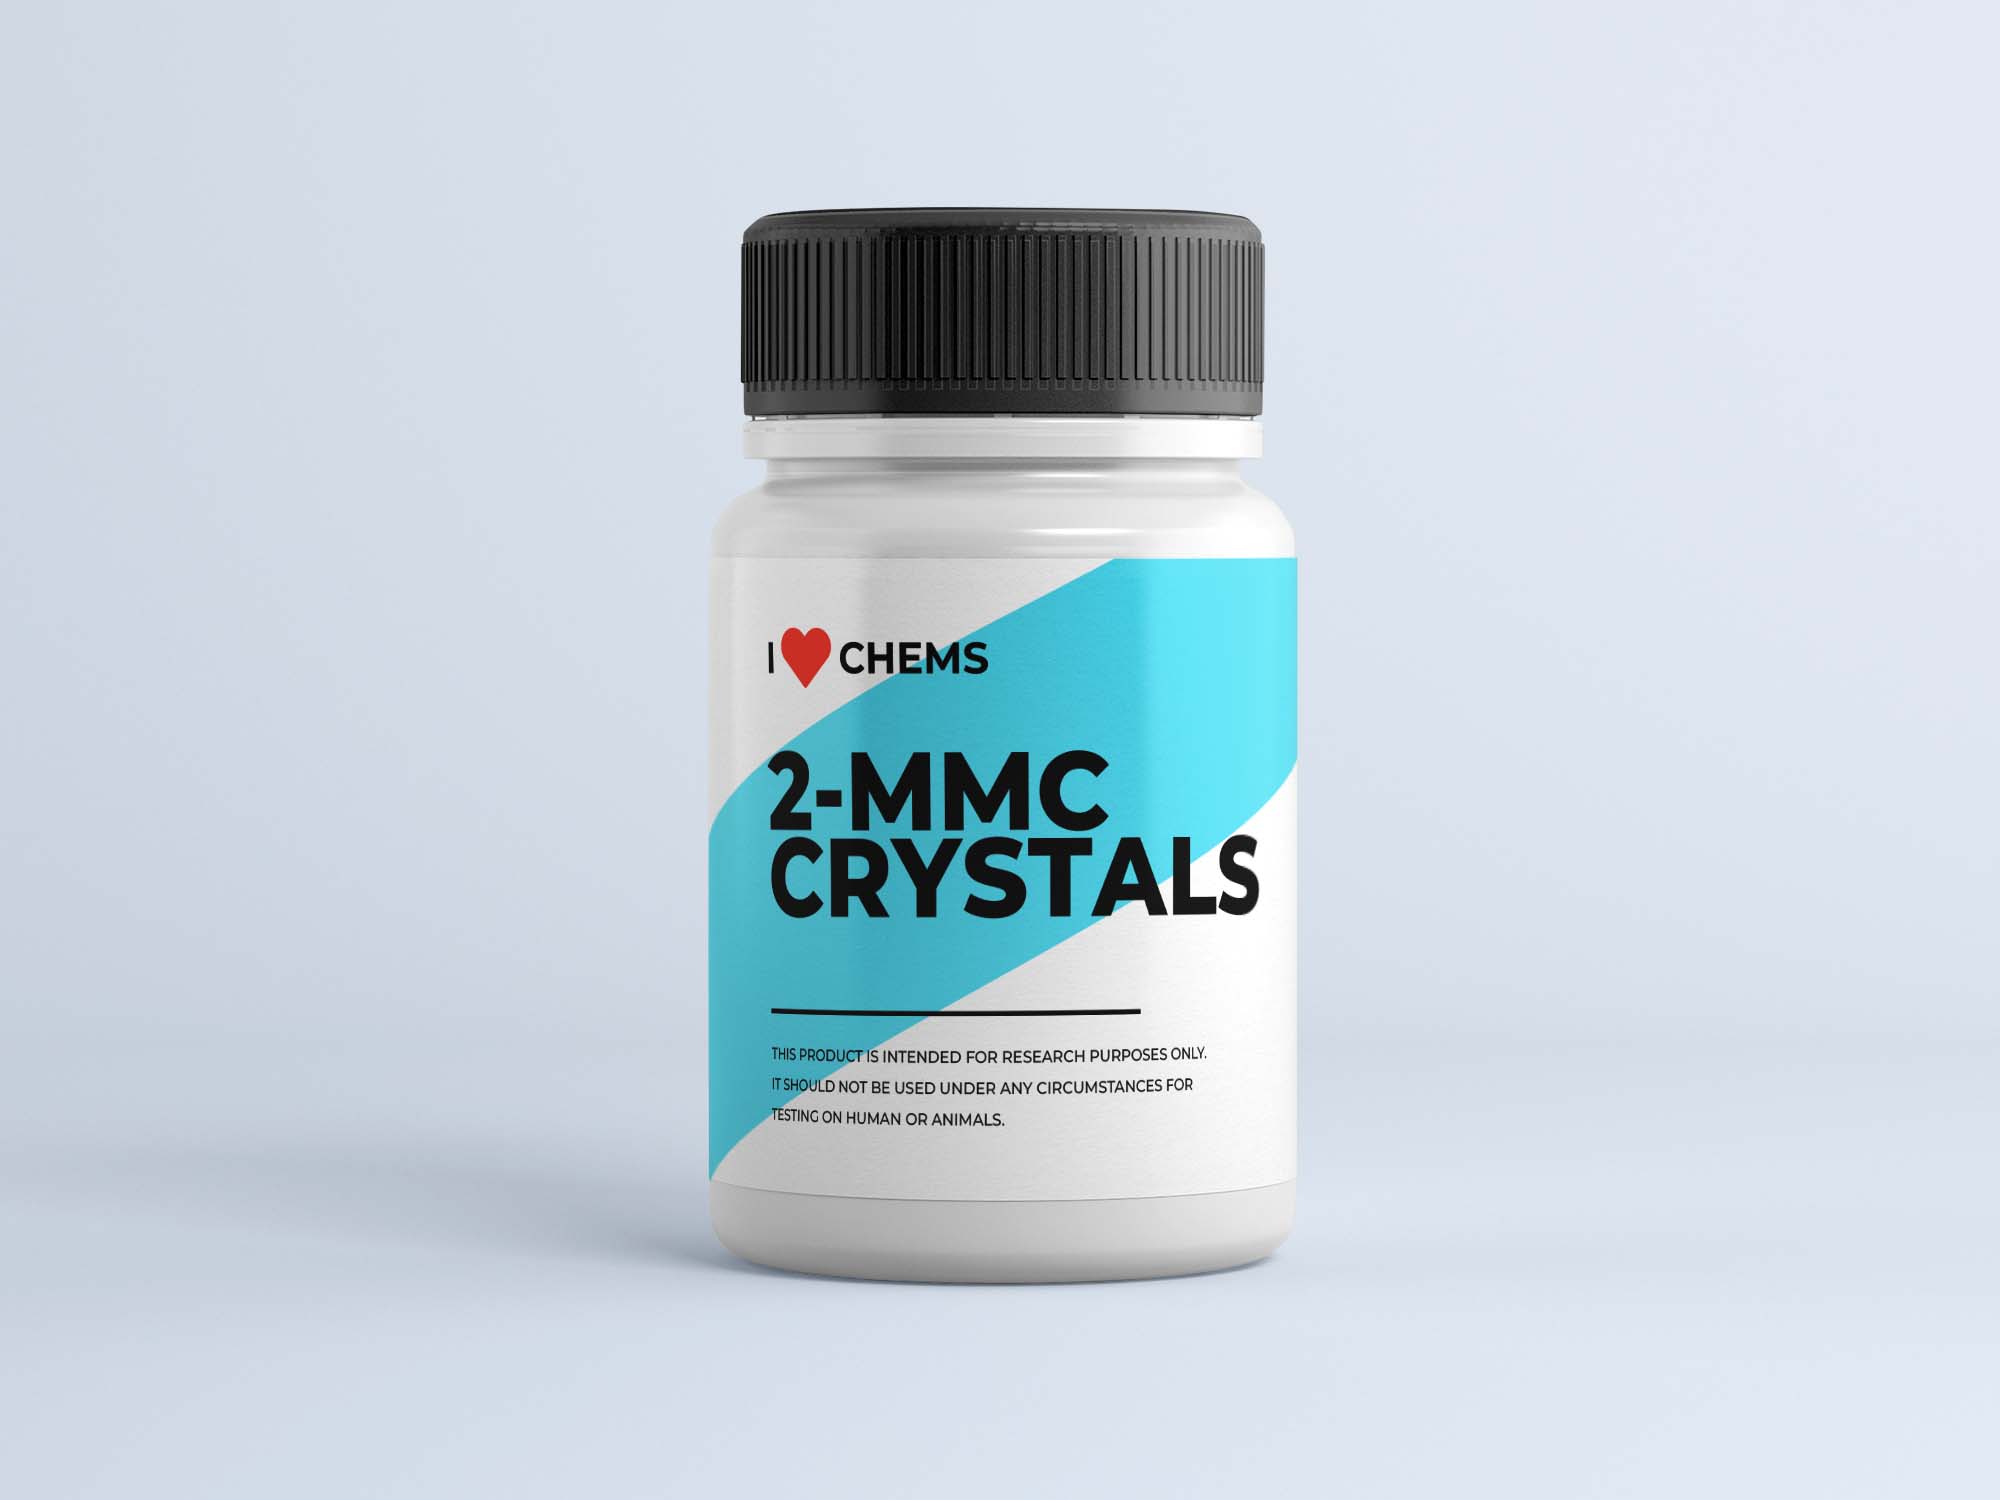 ilovechems rc 2mmc crystals-ilovechems